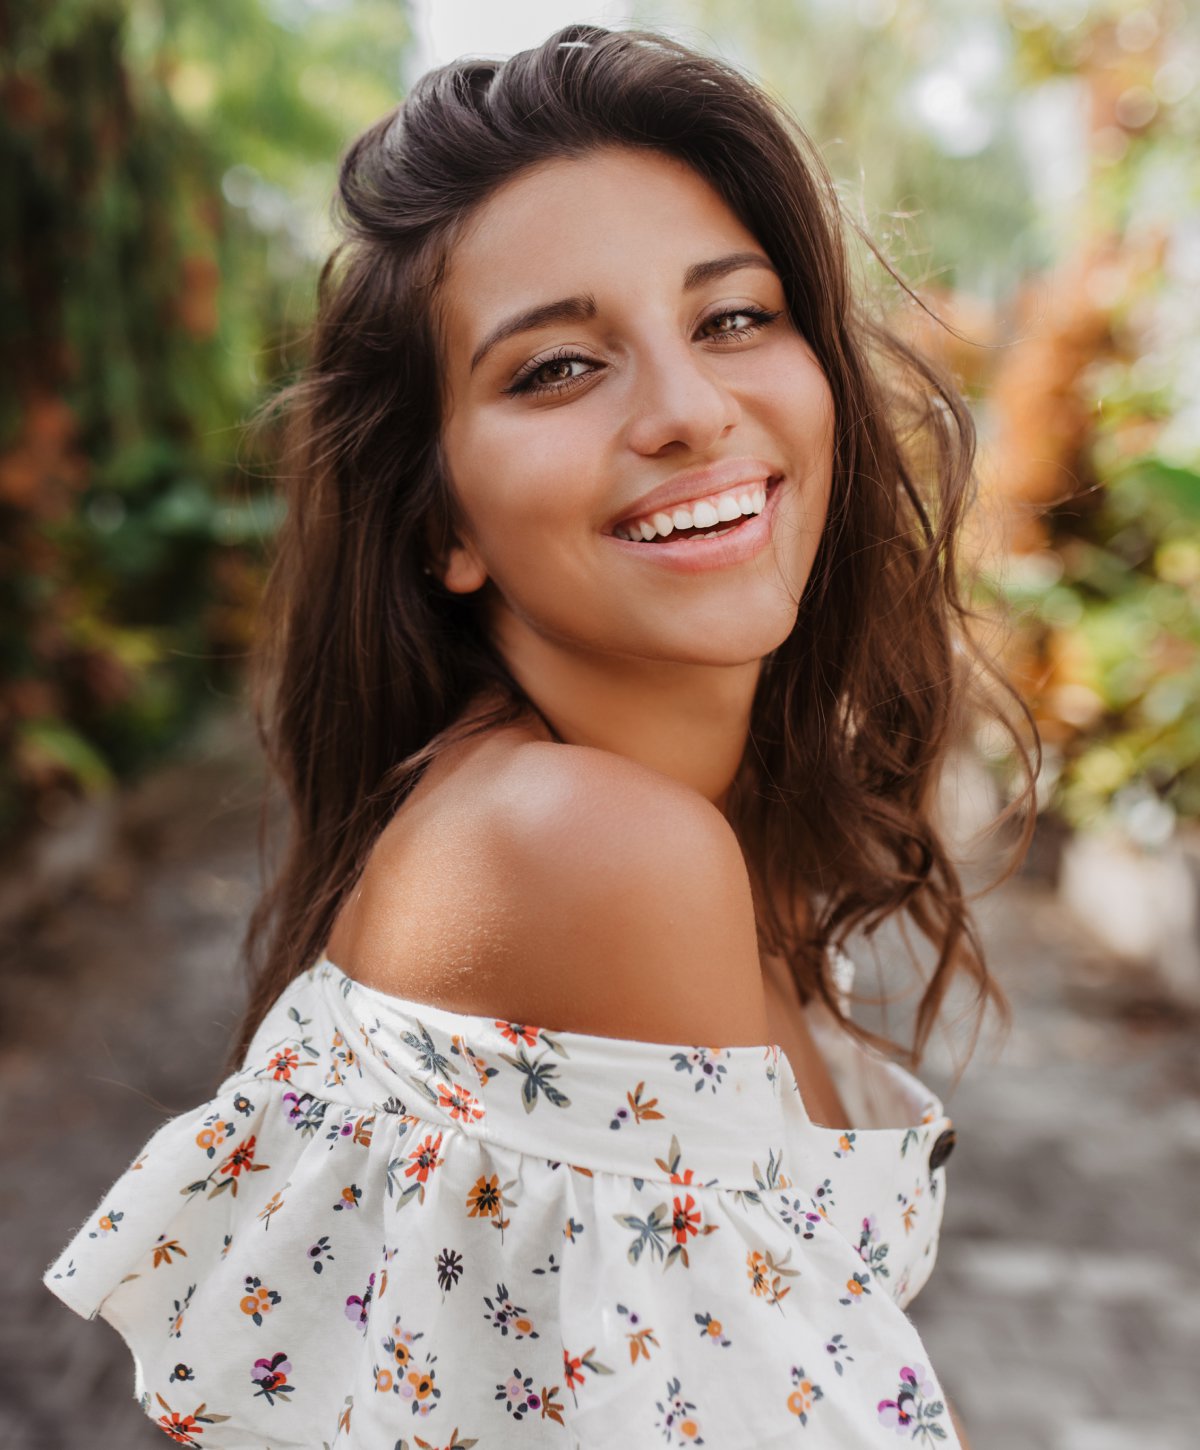 Woman Smiling feature